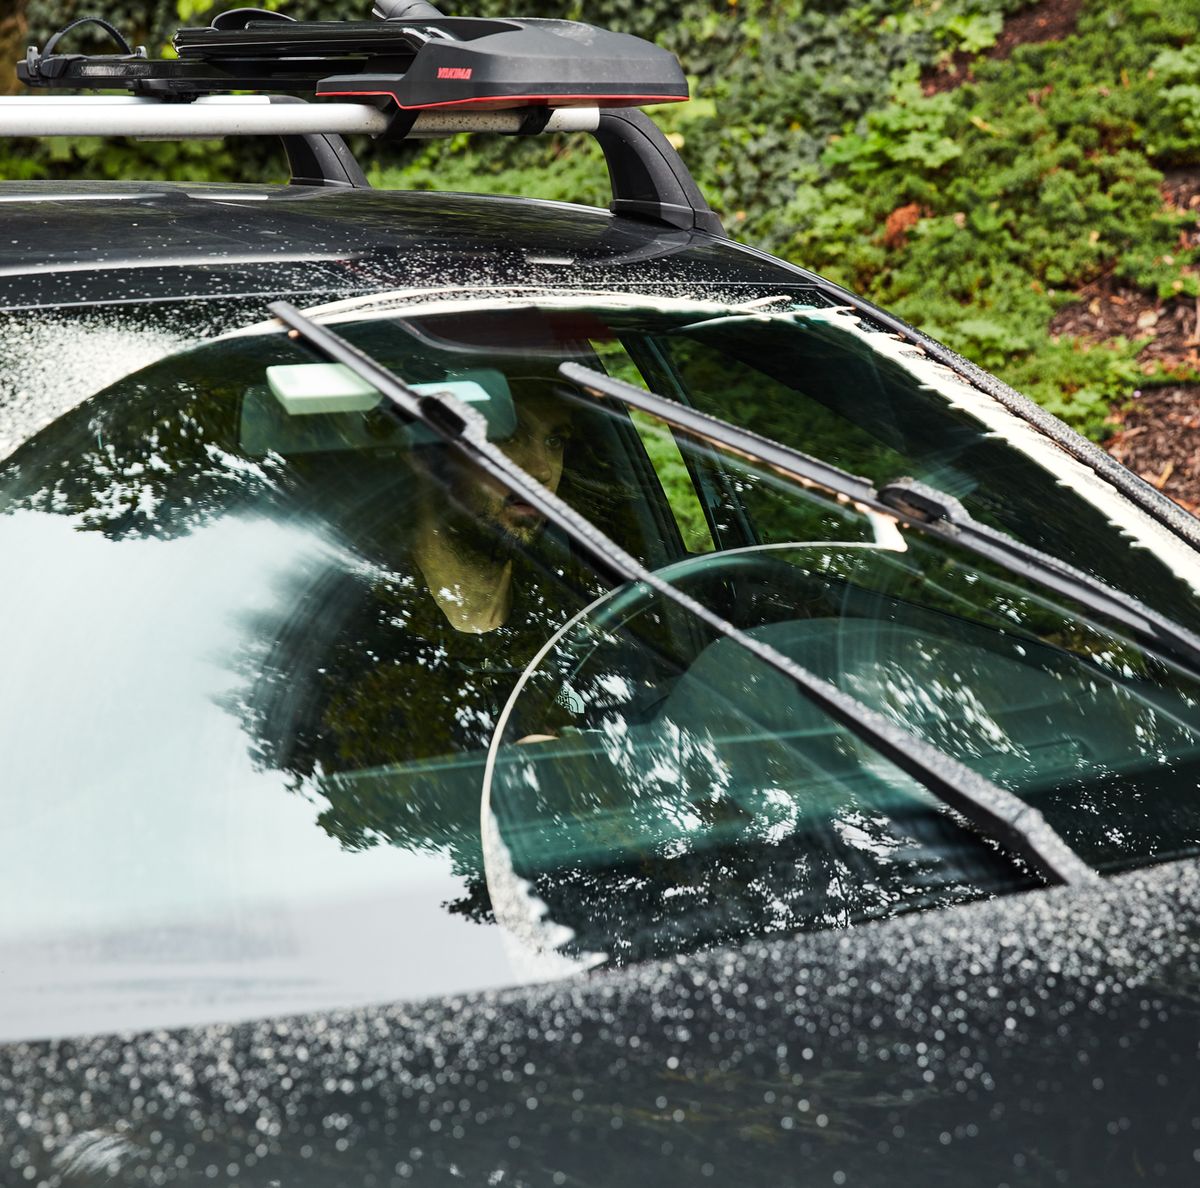 Why Don't All Cars Have a Rear Windshield Wiper?